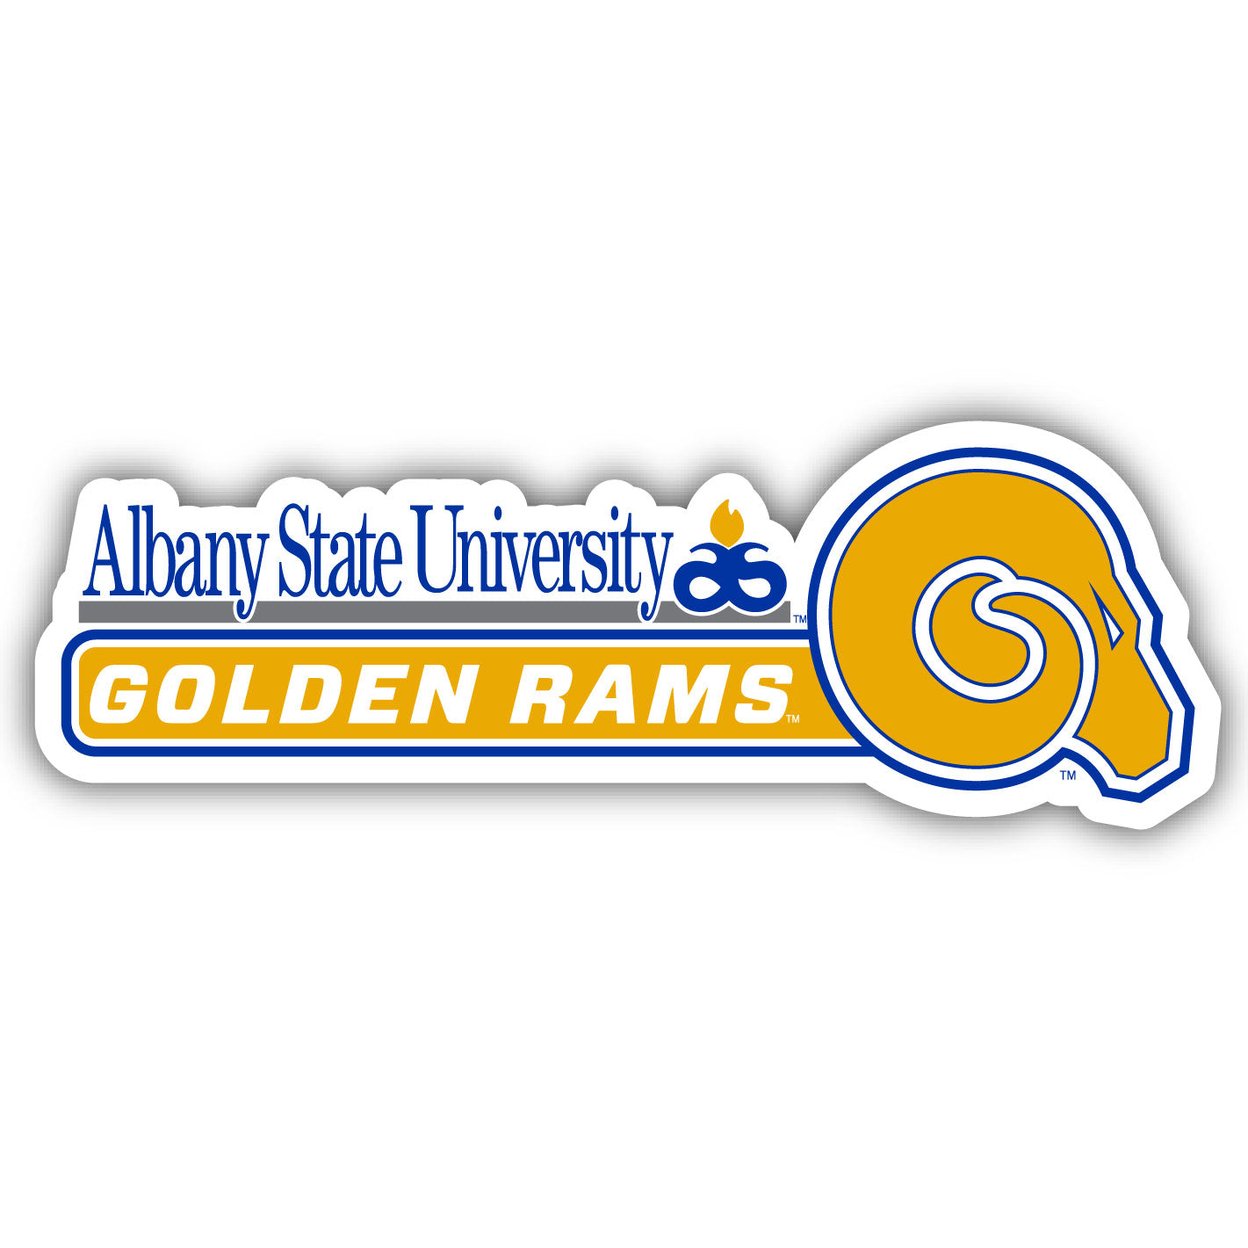 Albany State University 4 Inch Wide Colorful Vinyl Decal Sticker